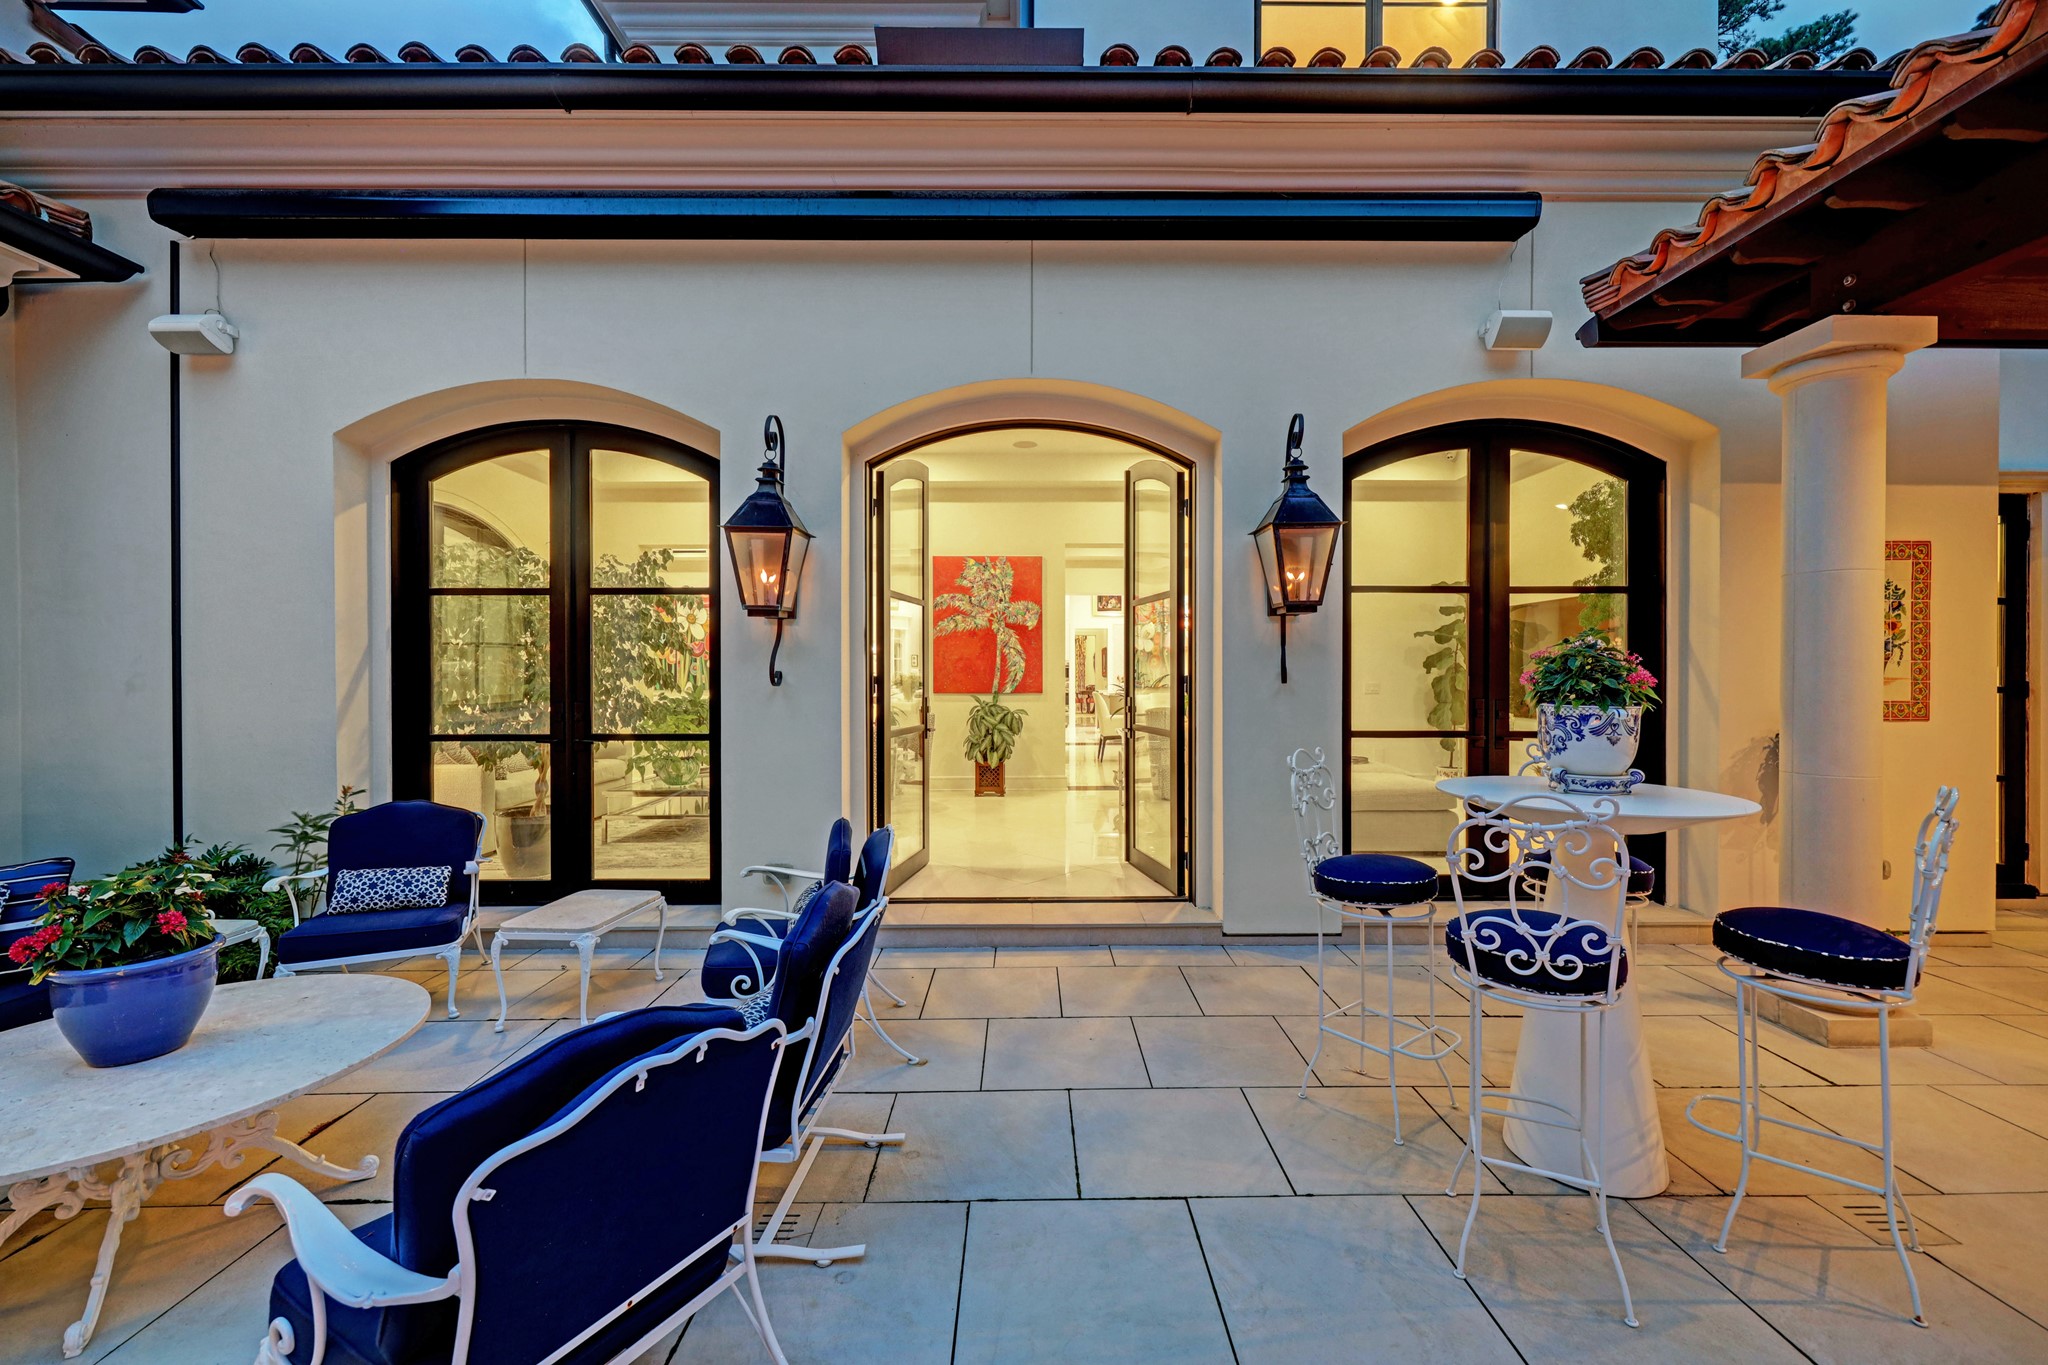 [Patio and Family Room]
French doors open to the family room.